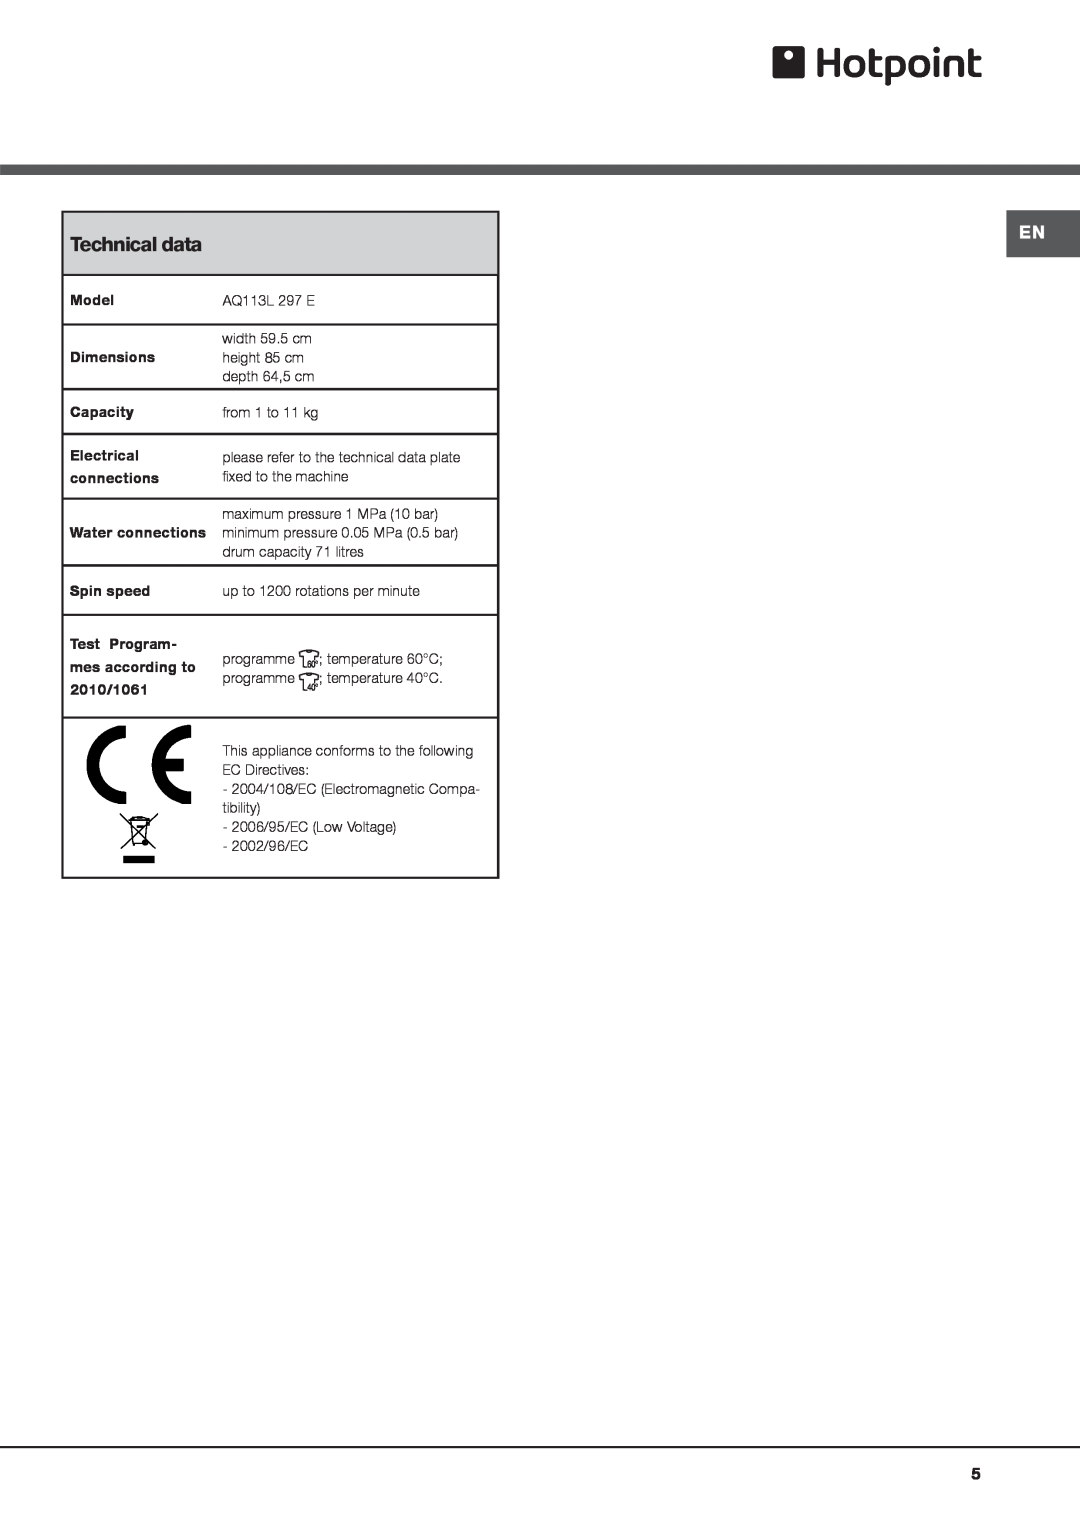 Hotpoint AQ113L 297 E manual Technical data, from 1 to 11 kg 